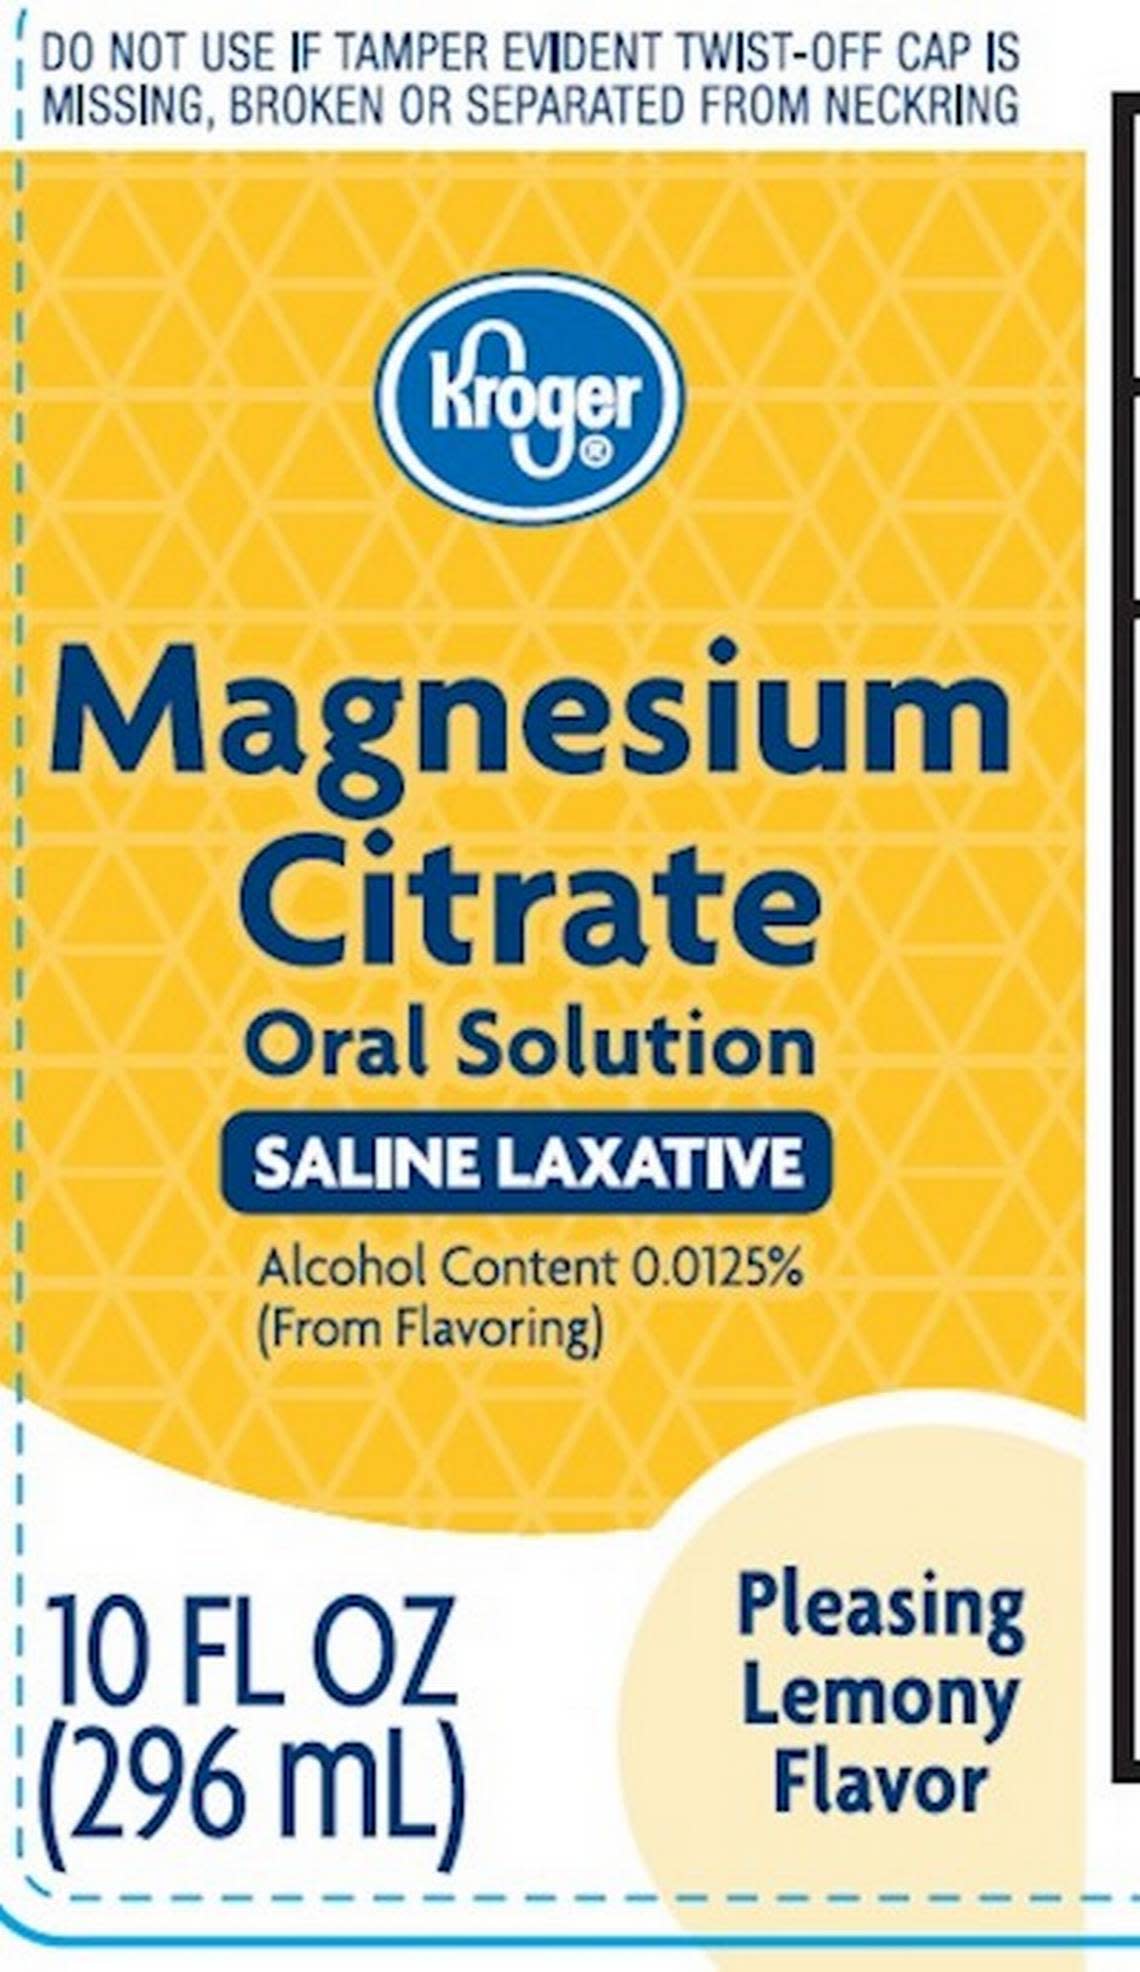 Kroger Magnesium Citrate laxative